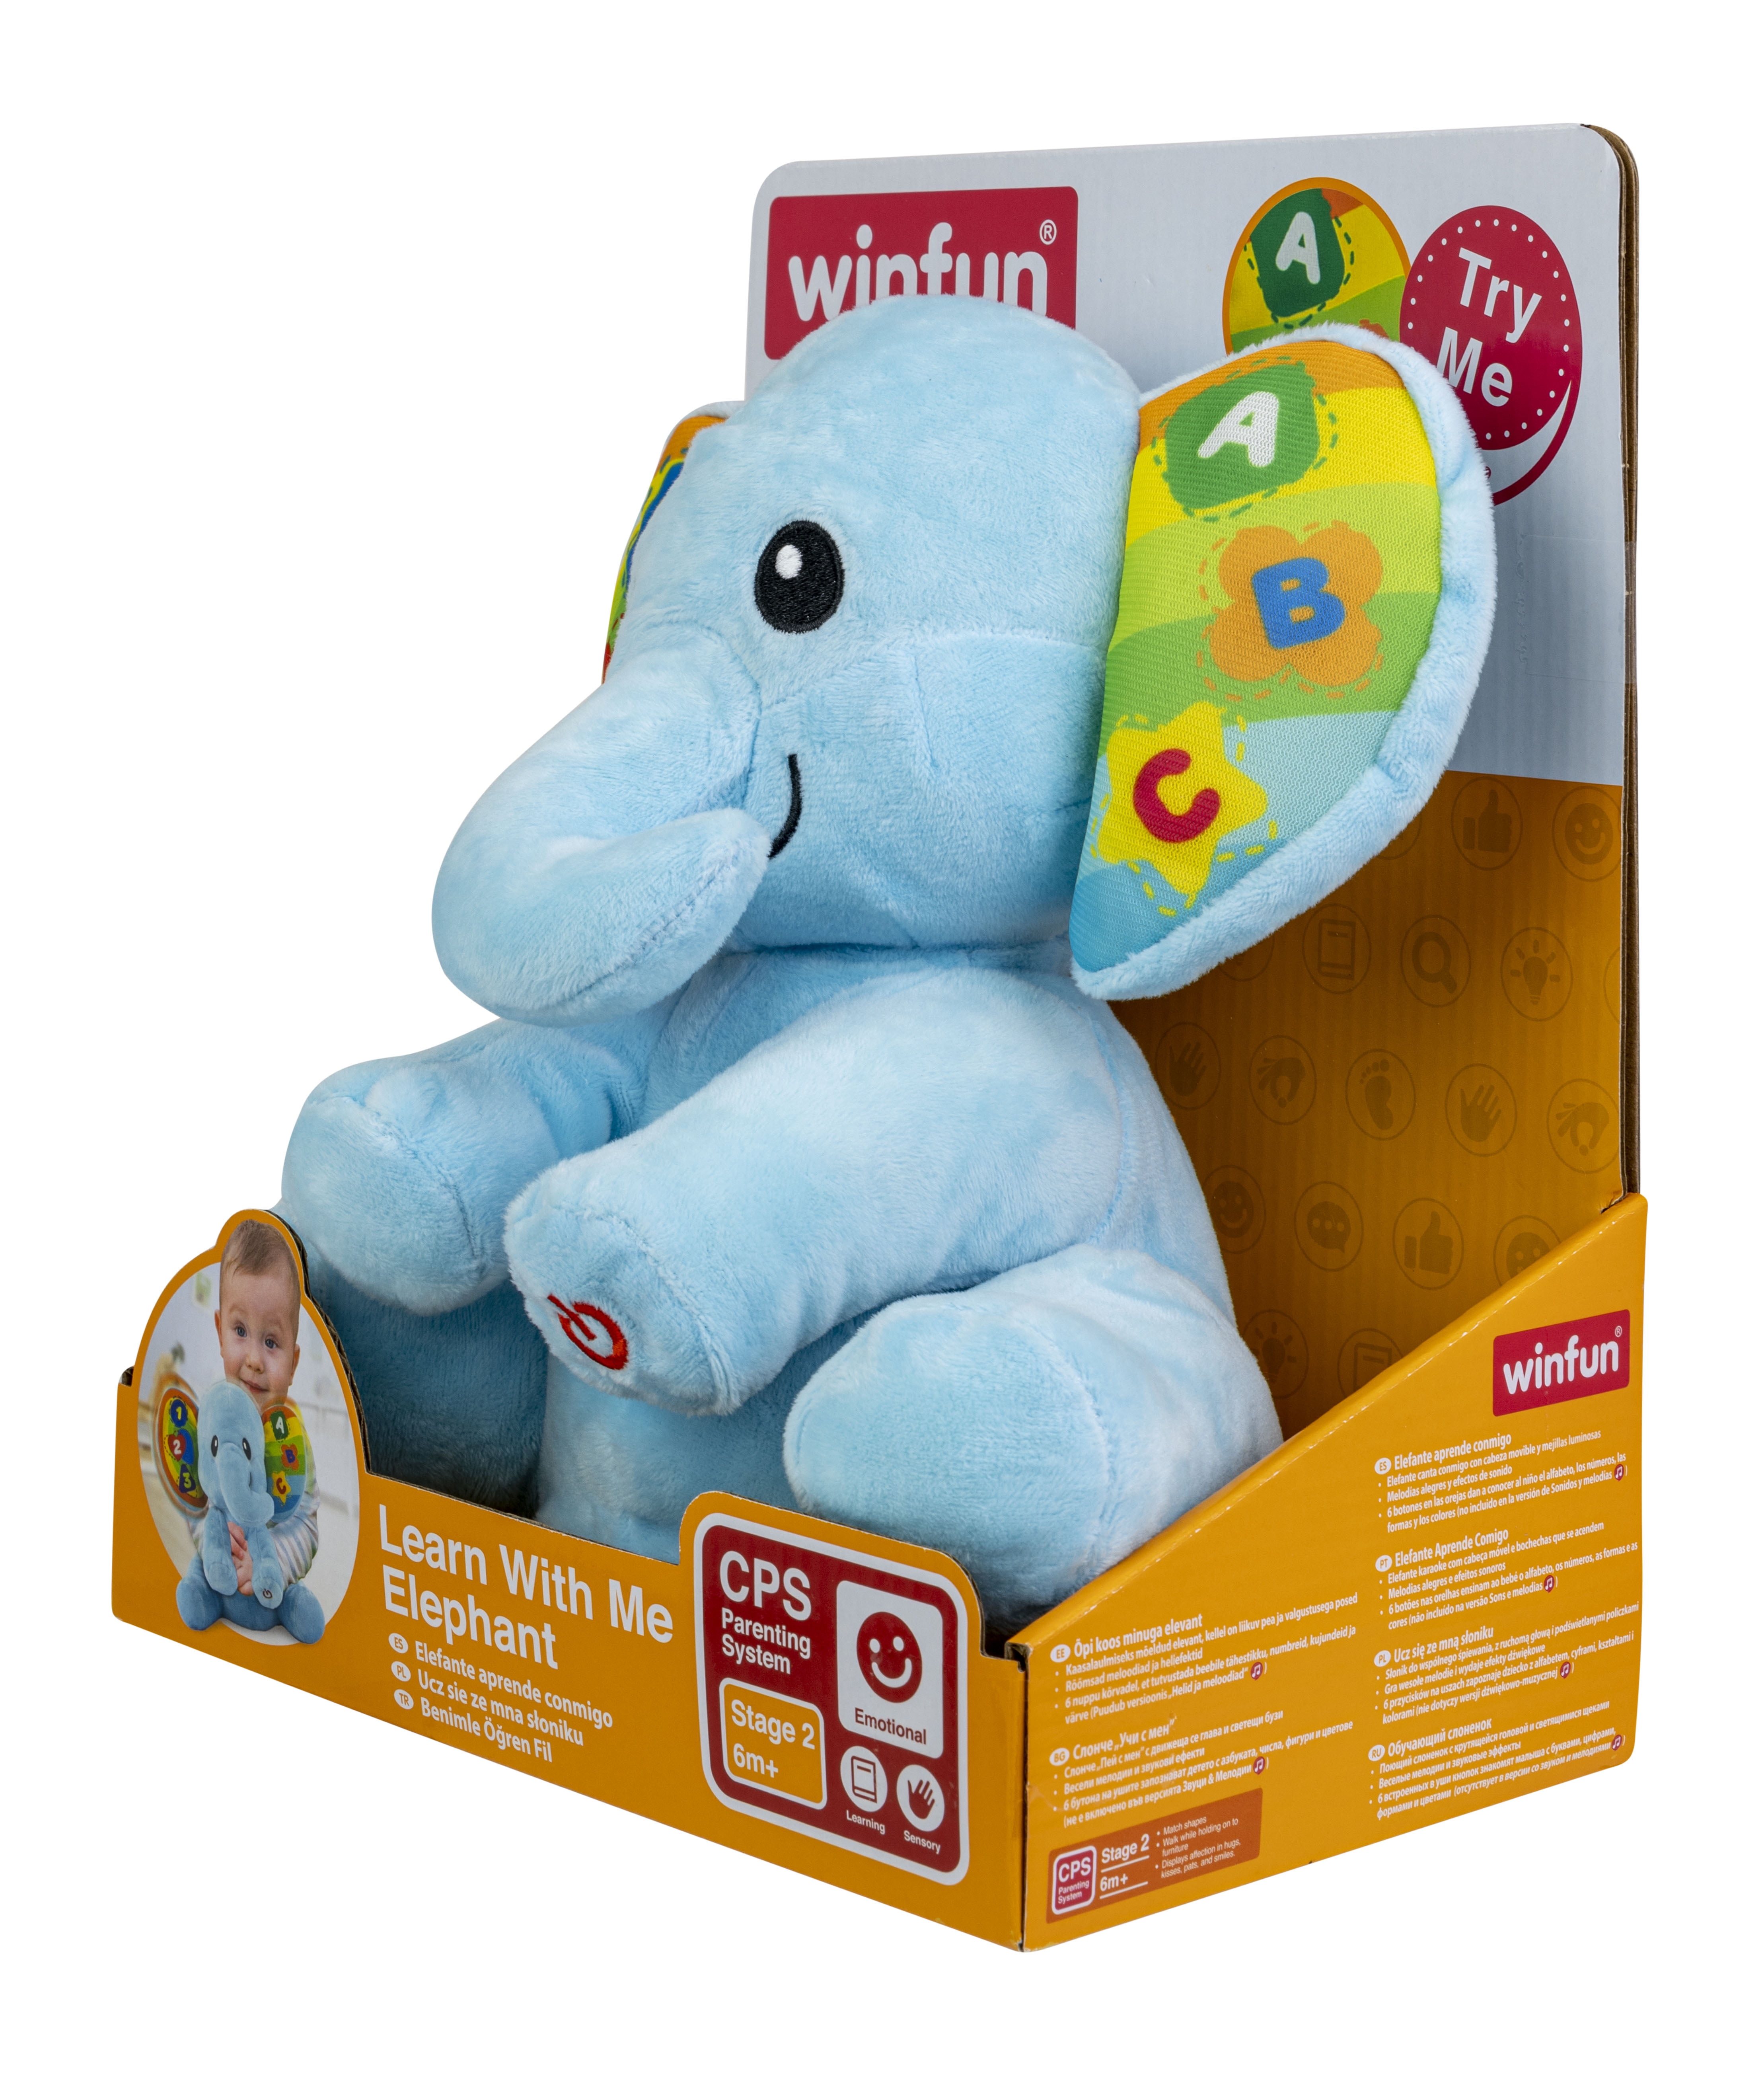 Buy WinFun Sing and Learn With Me Elephant NEW at Ubuy Ghana